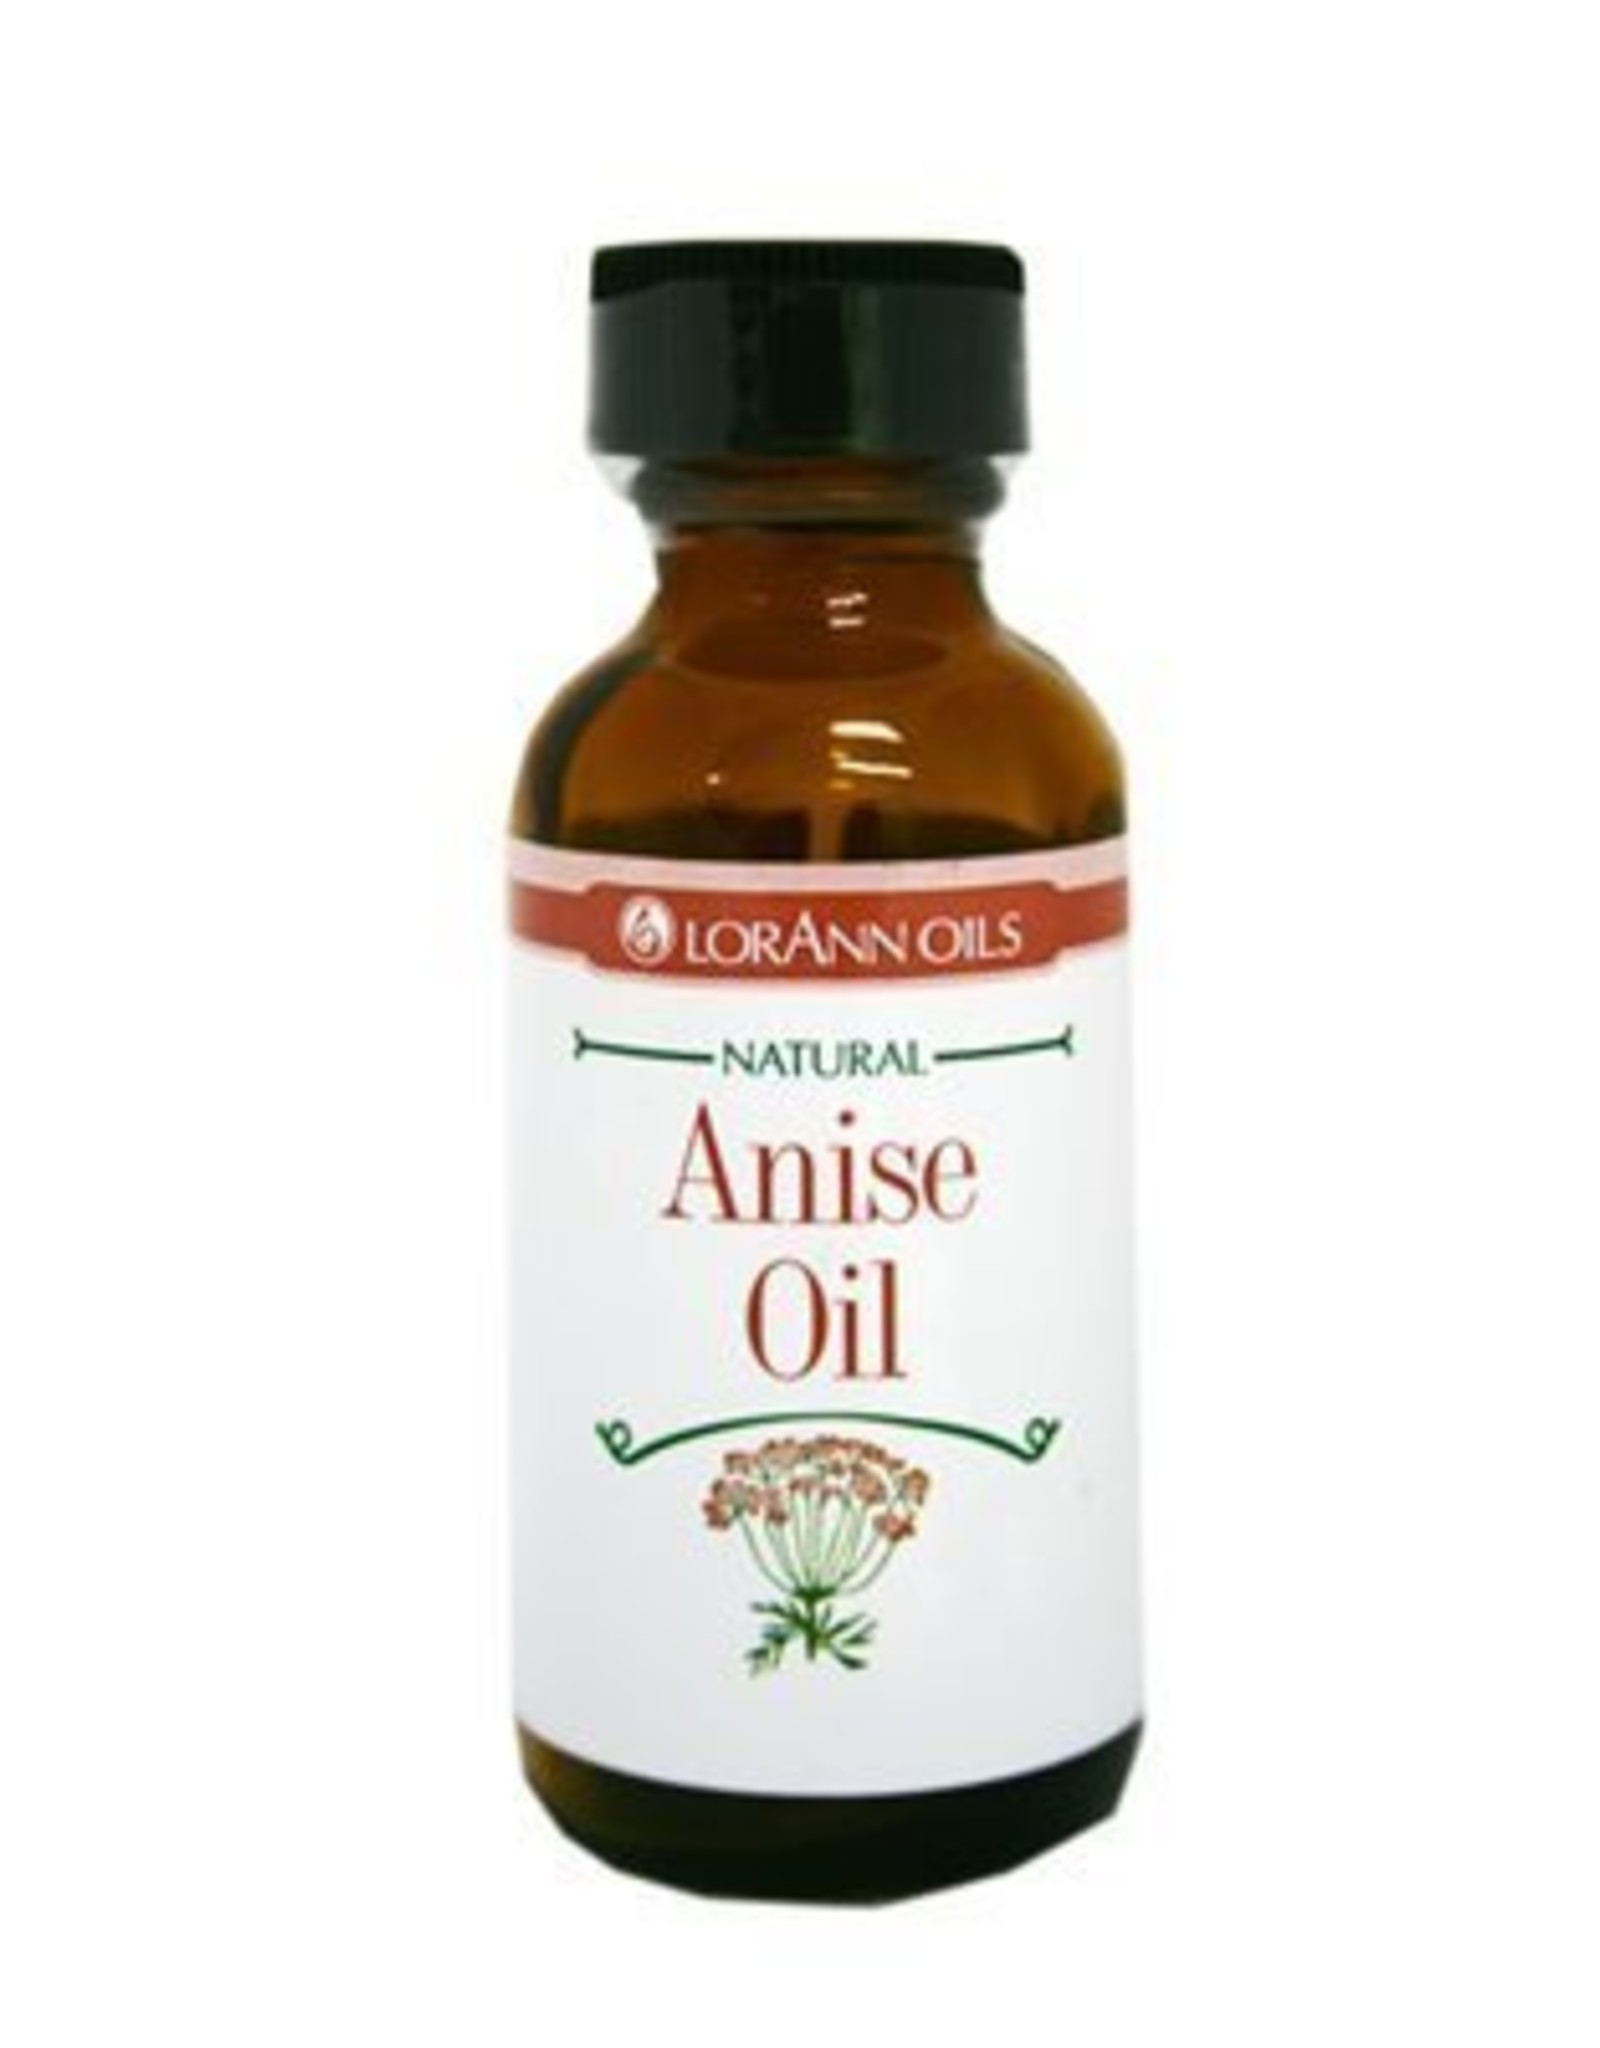 ANISE OIL NATURAL OUNCE